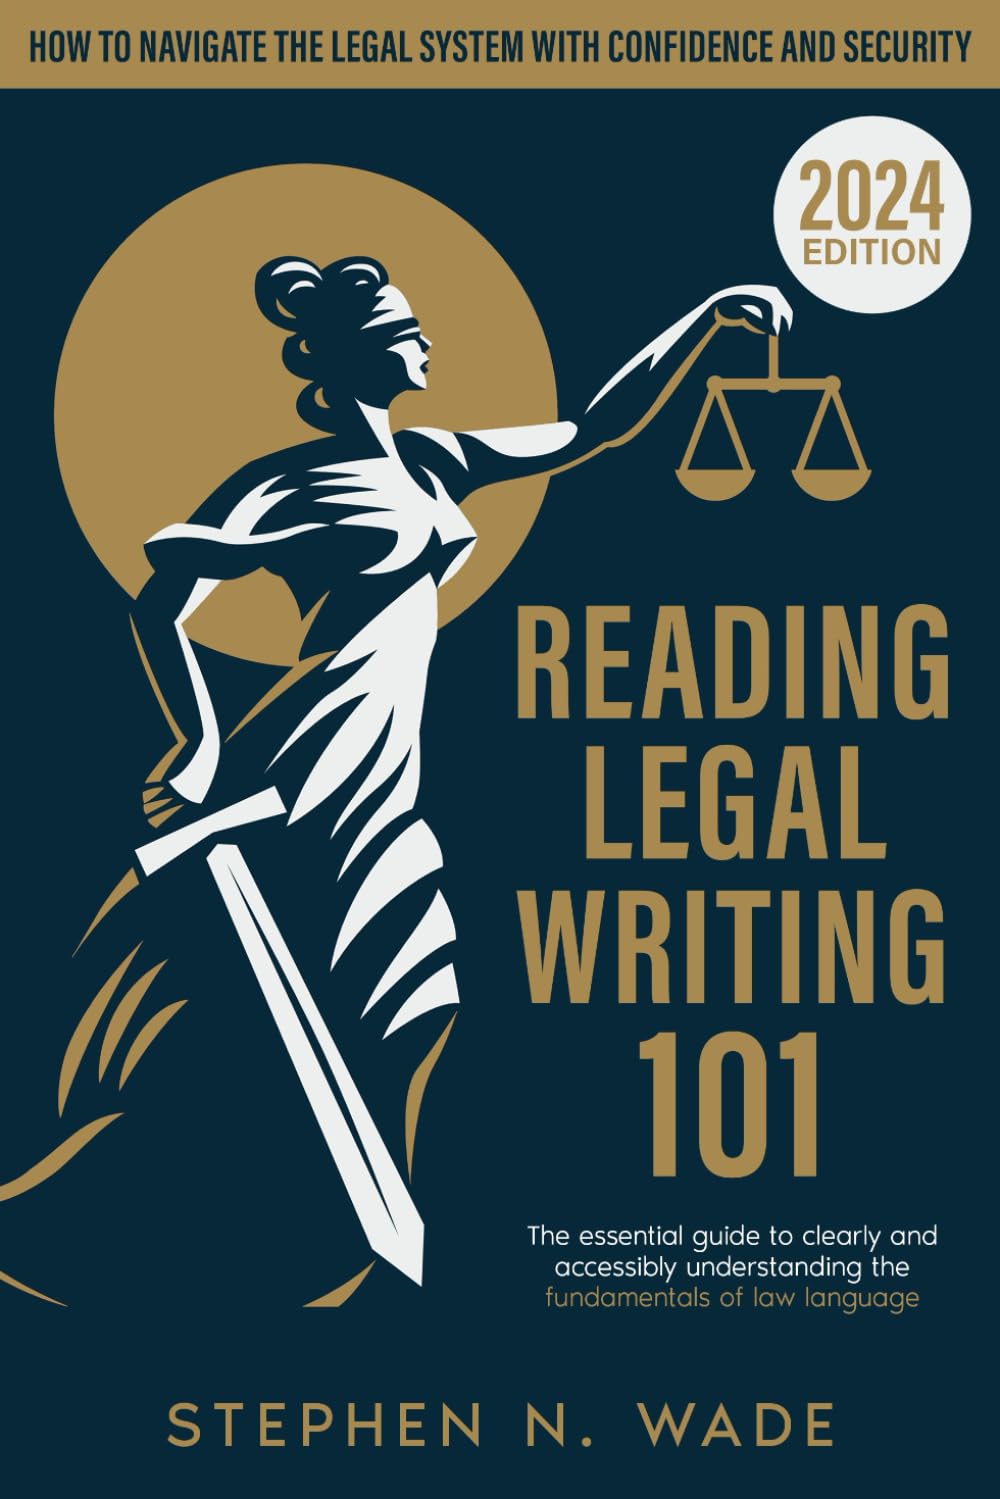 Reading Legal Writing 101: The Essential Guide to Clearly and Accessibly Understanding the Fundamentals of Law Language and Navigating the Legal System with Confidence and Security